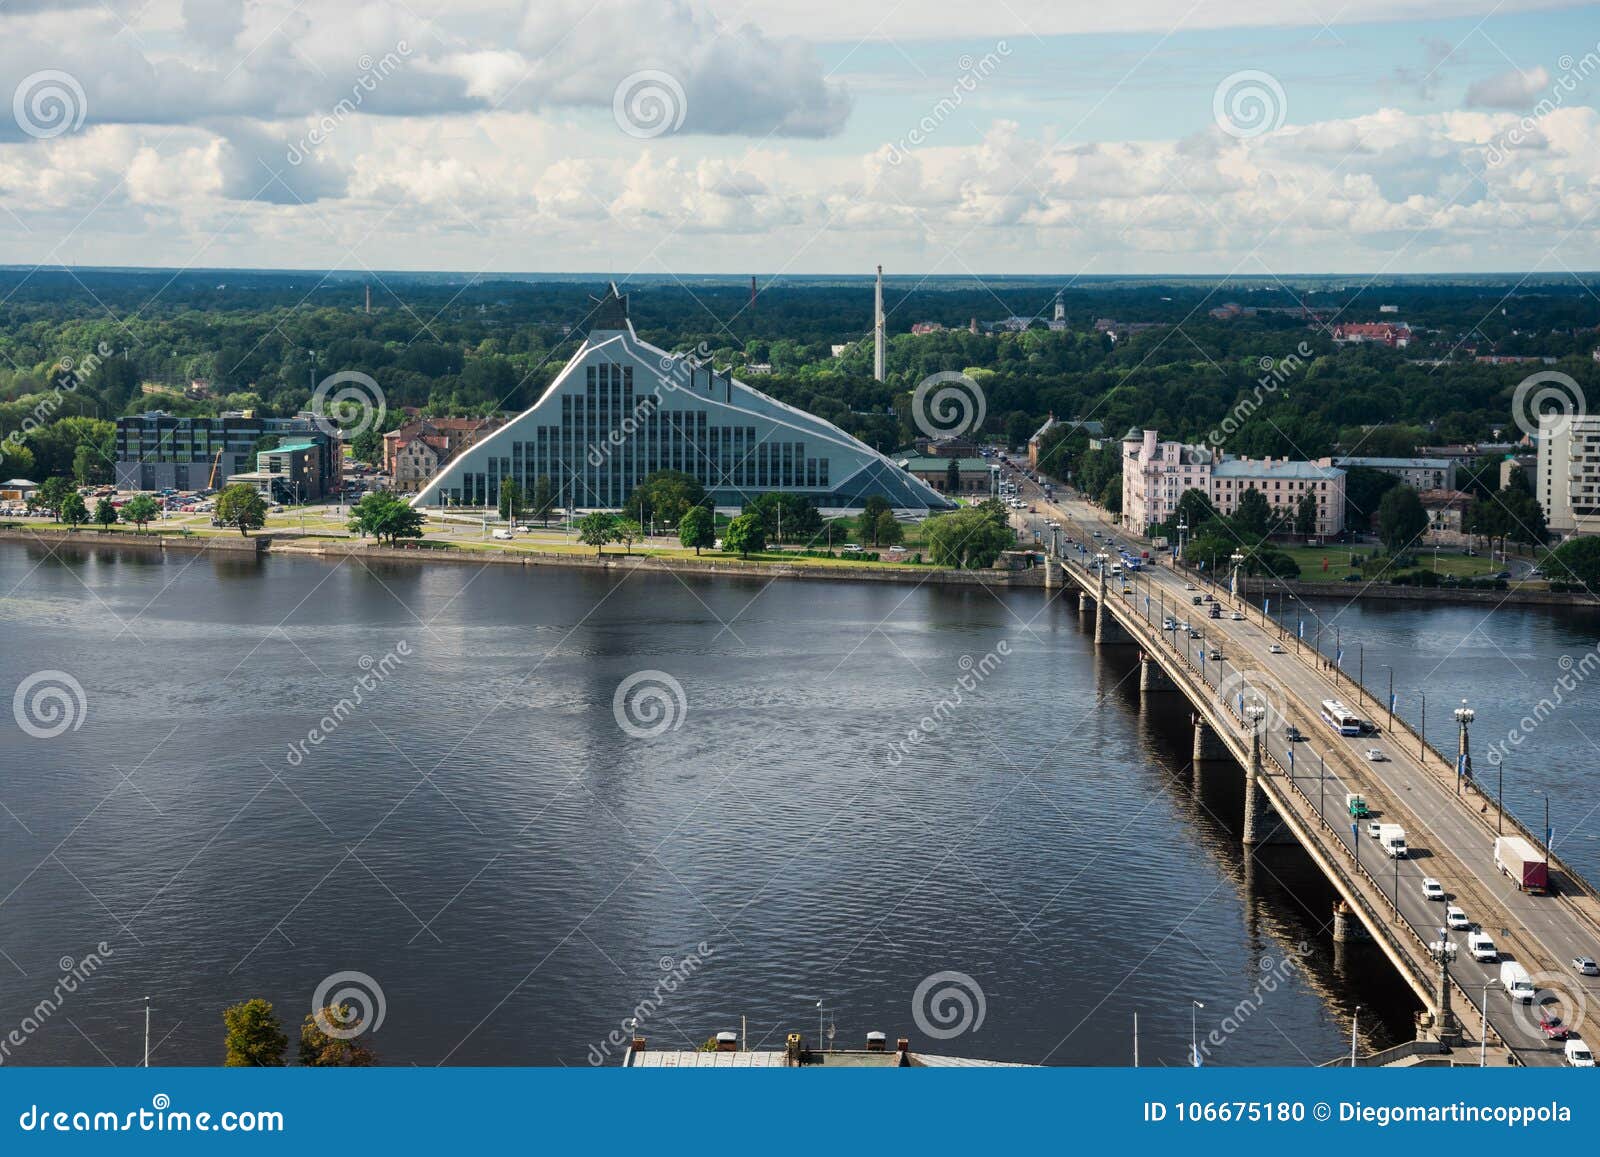 aerial view of daugava river and national library of latvia